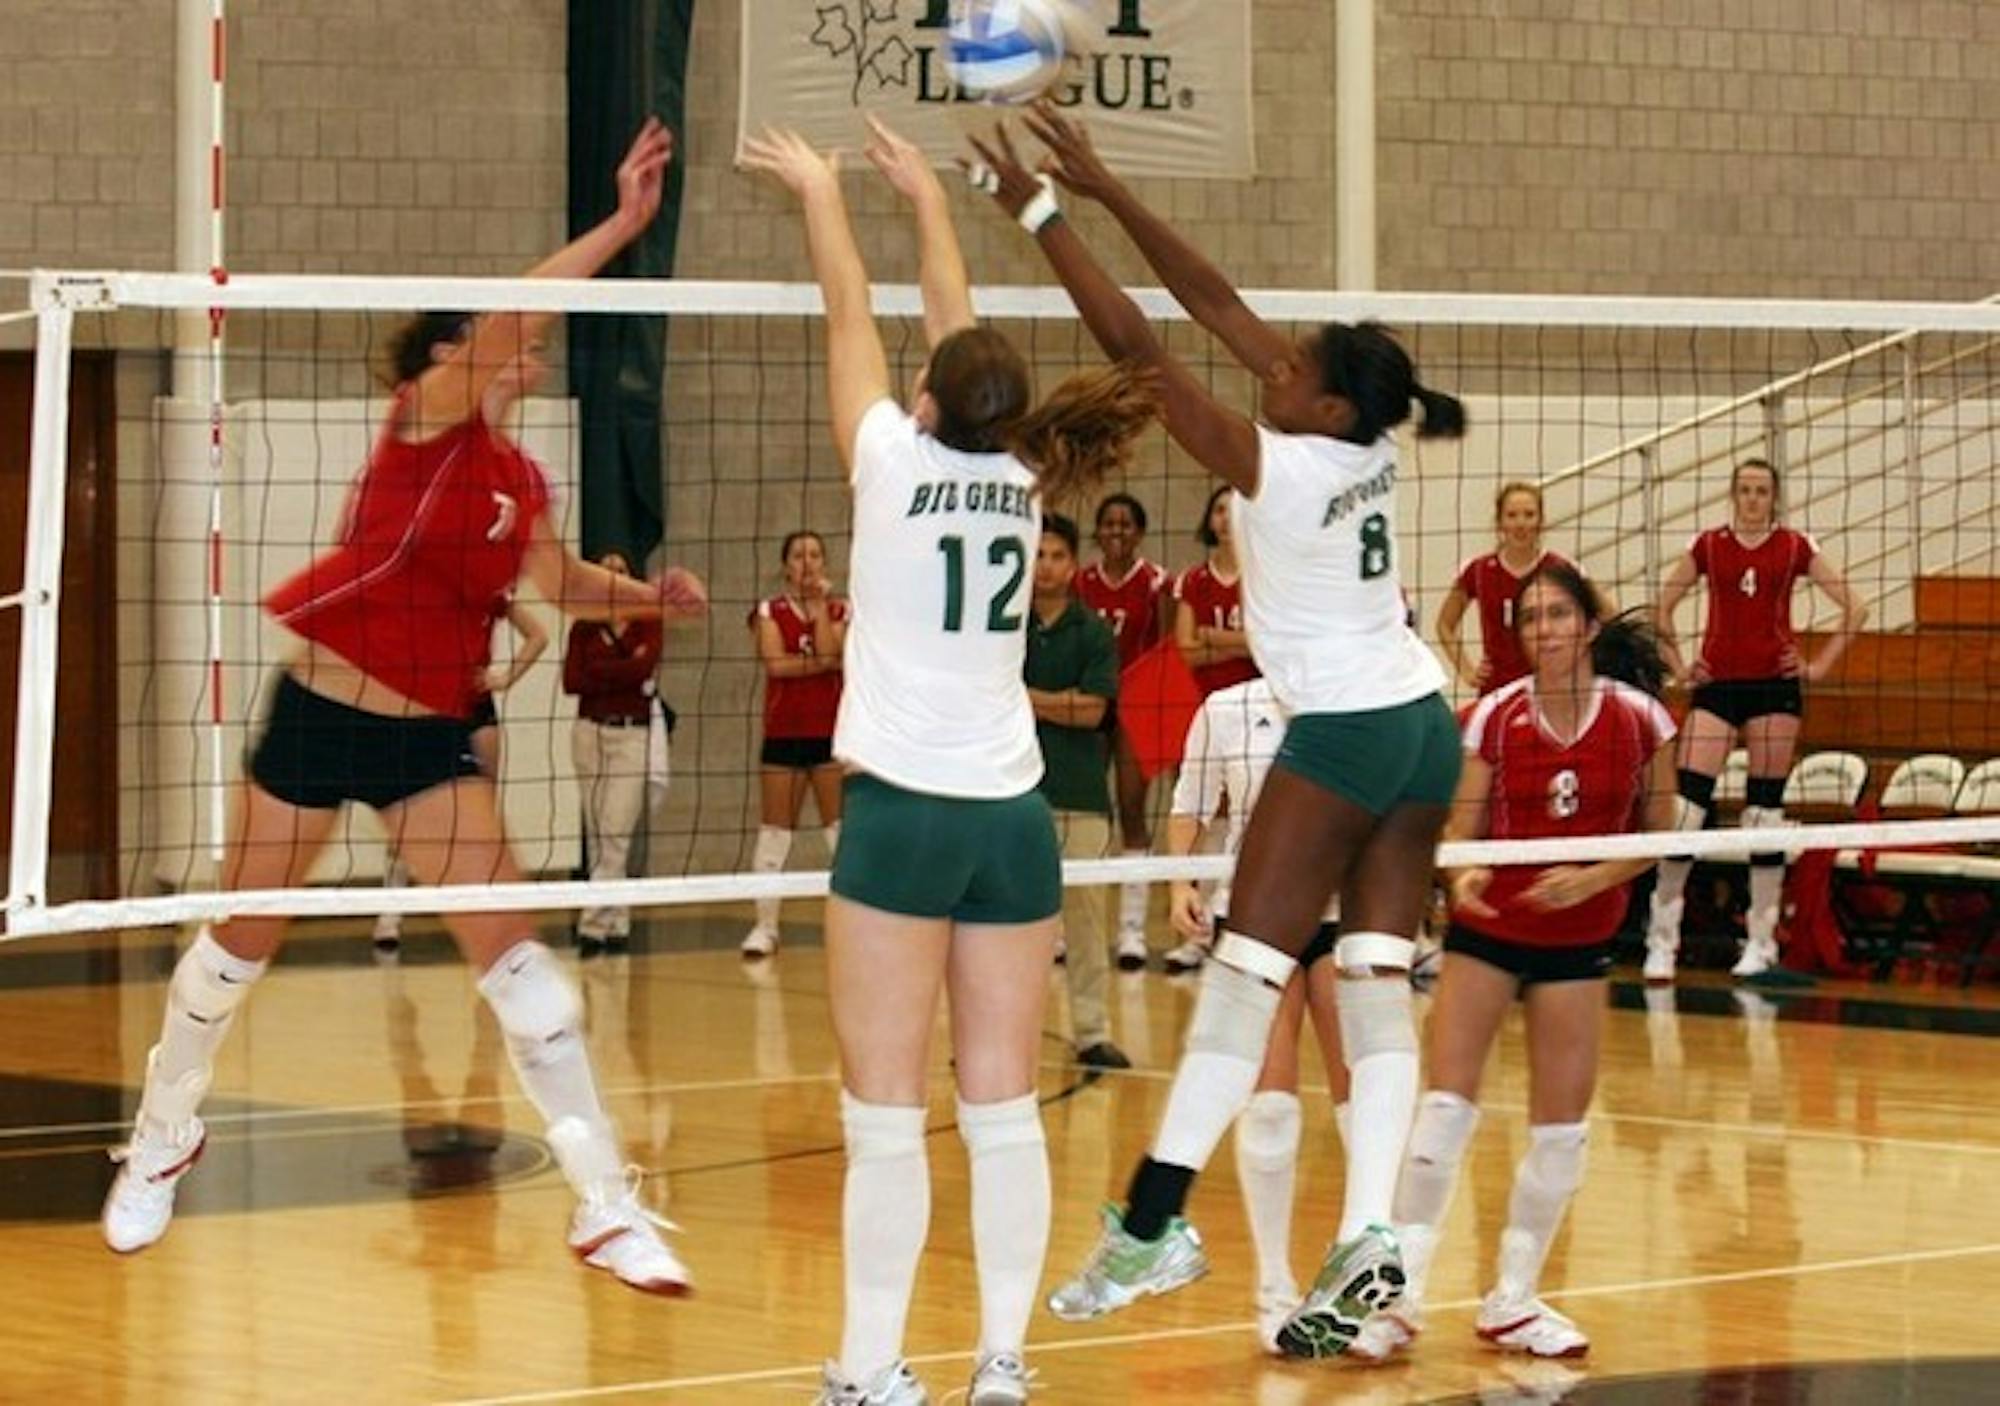 Big Green volleyball defeated Columbia in a five-game thriller only to lose to Cornell in four games the following day.